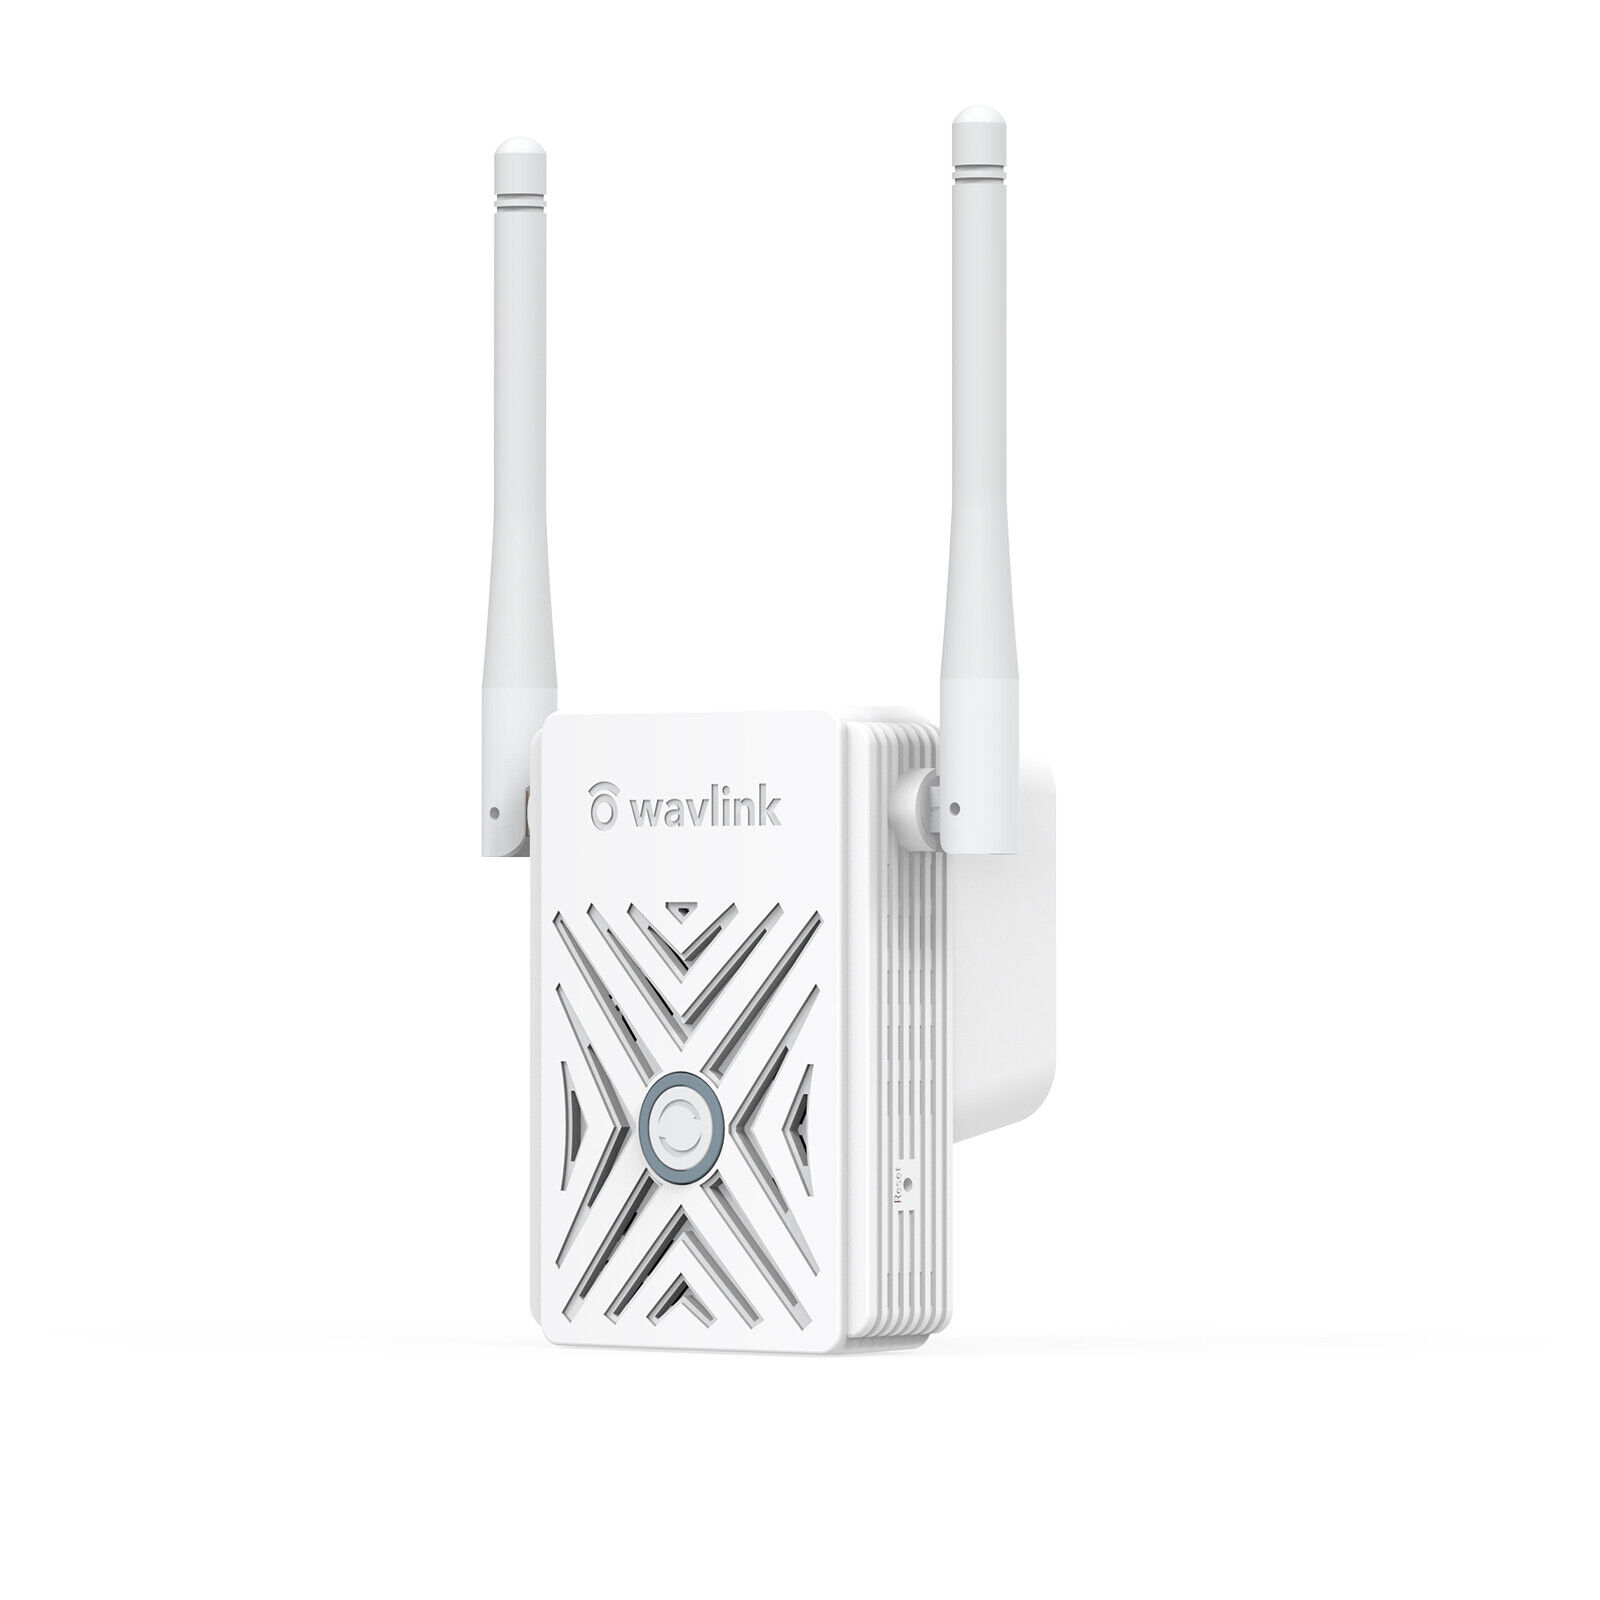 Wavlink Wifi Repeater Wireless Range Extender Signal Booster 300Mbps Stronger